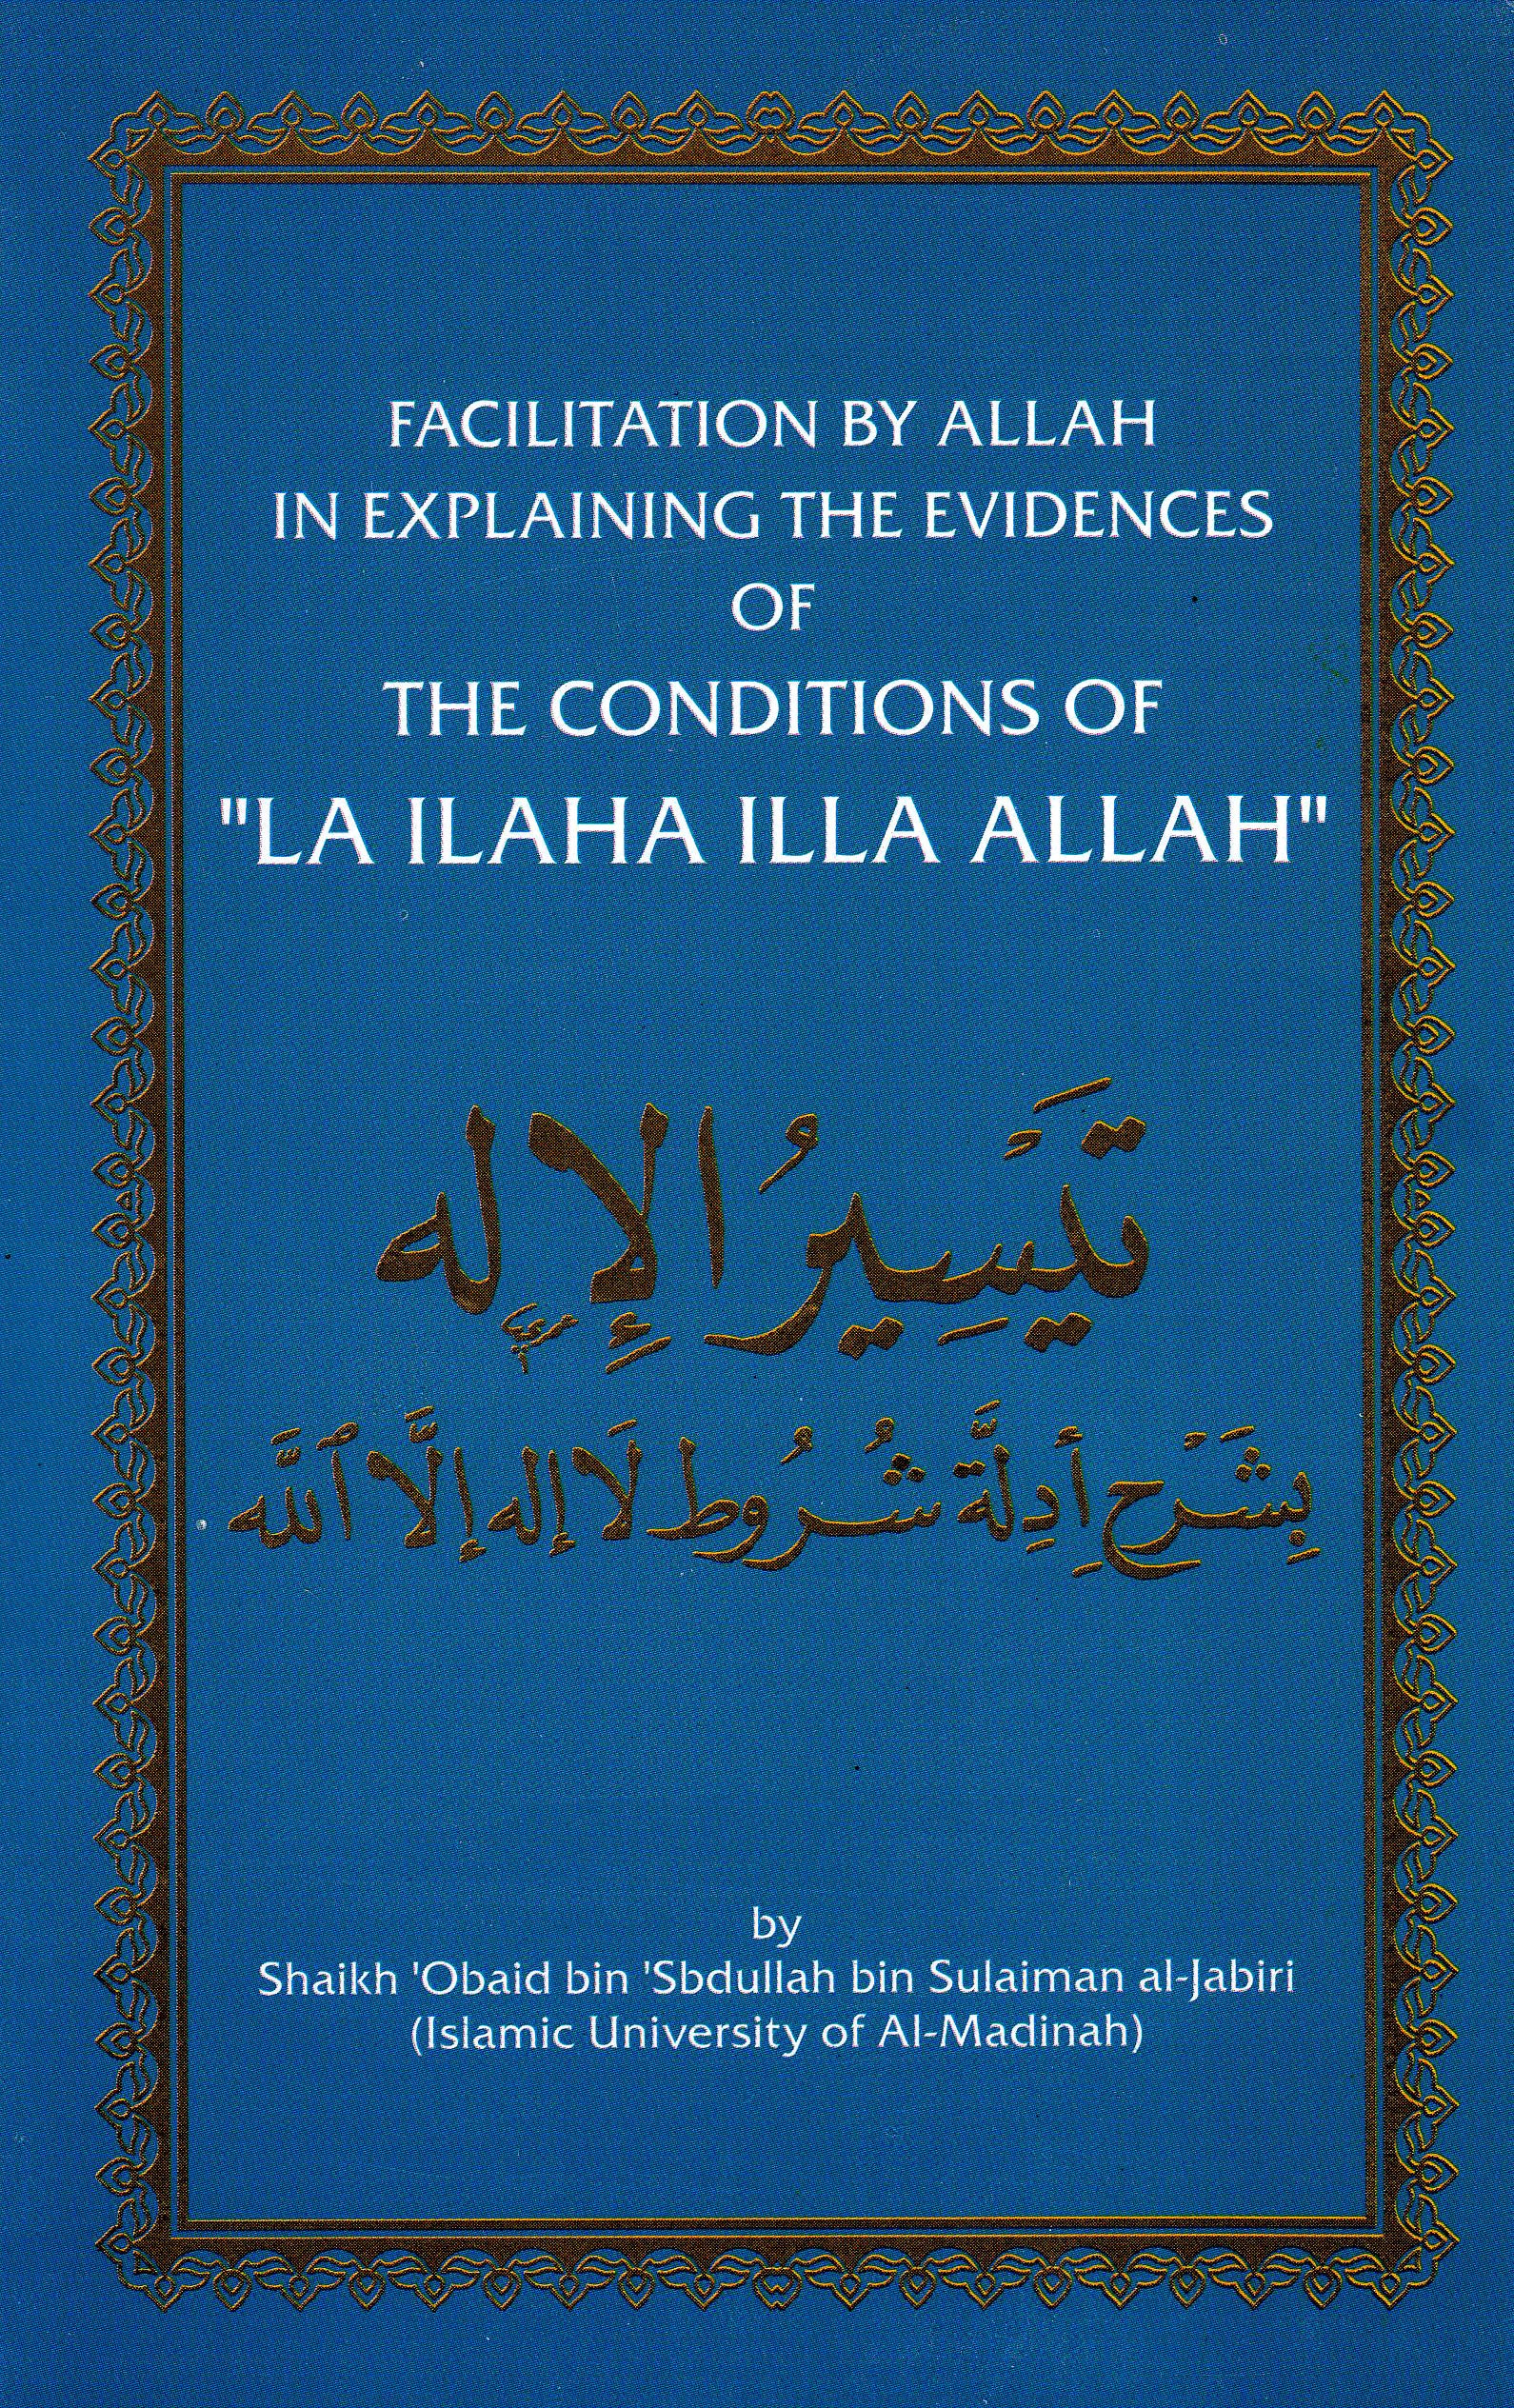 Facilitation by Allah in Explaining the Evidences of The Conditions of "La ilaha illa Allah"